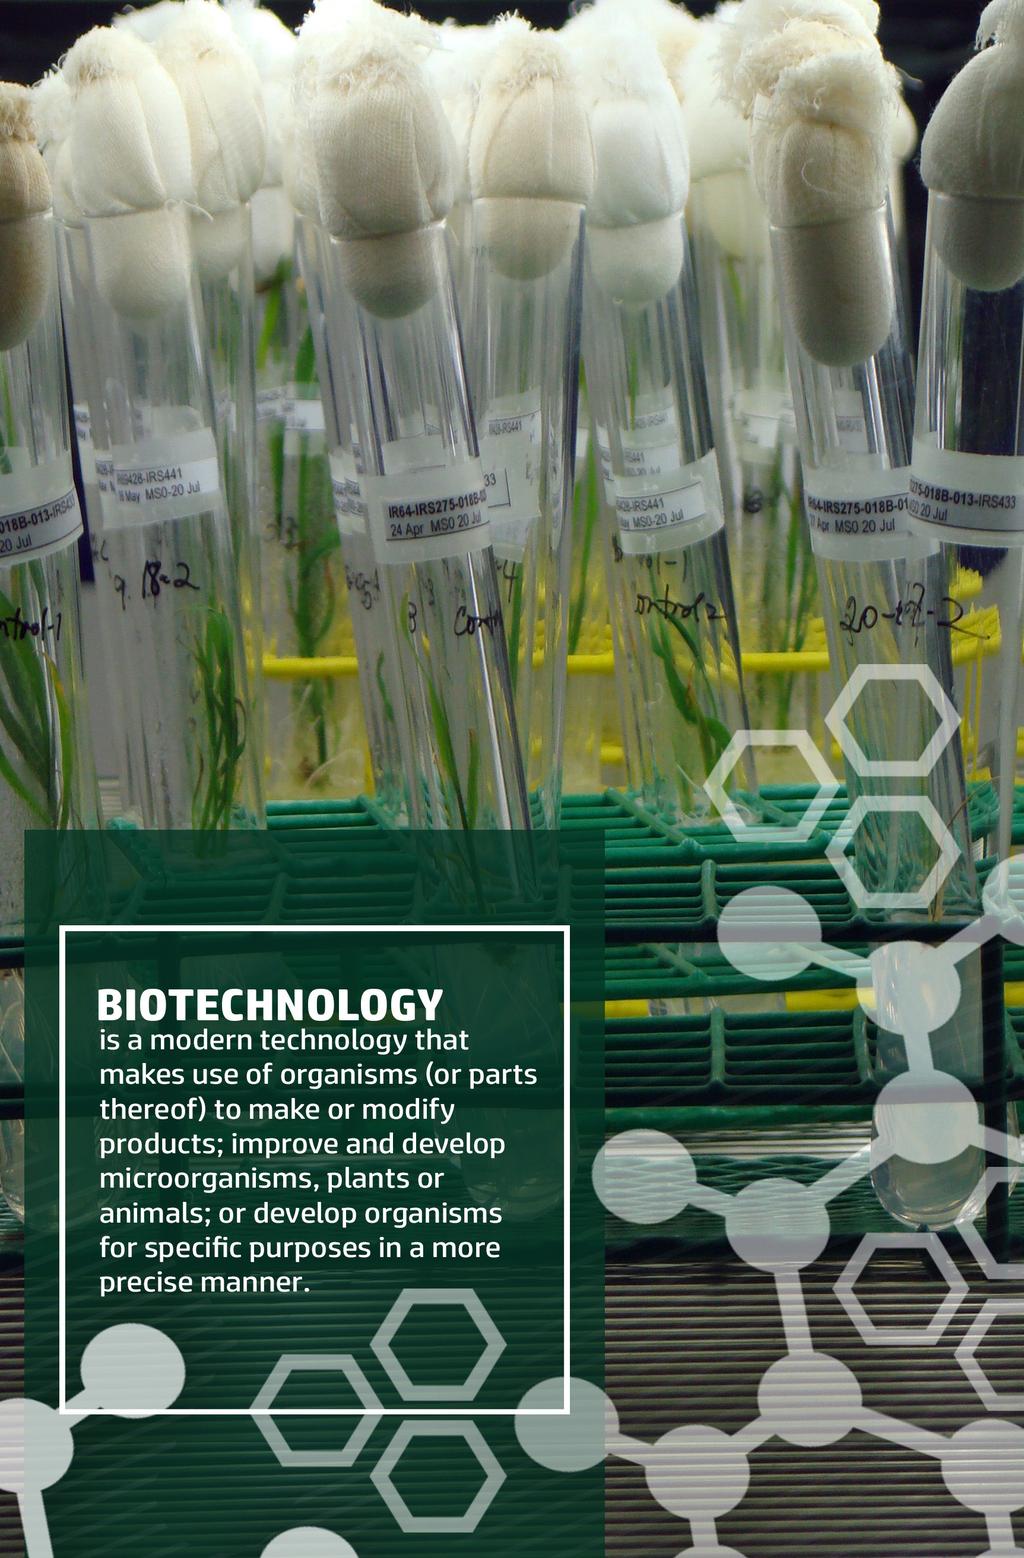 WHAT IS BIOTECHNOLOGY?